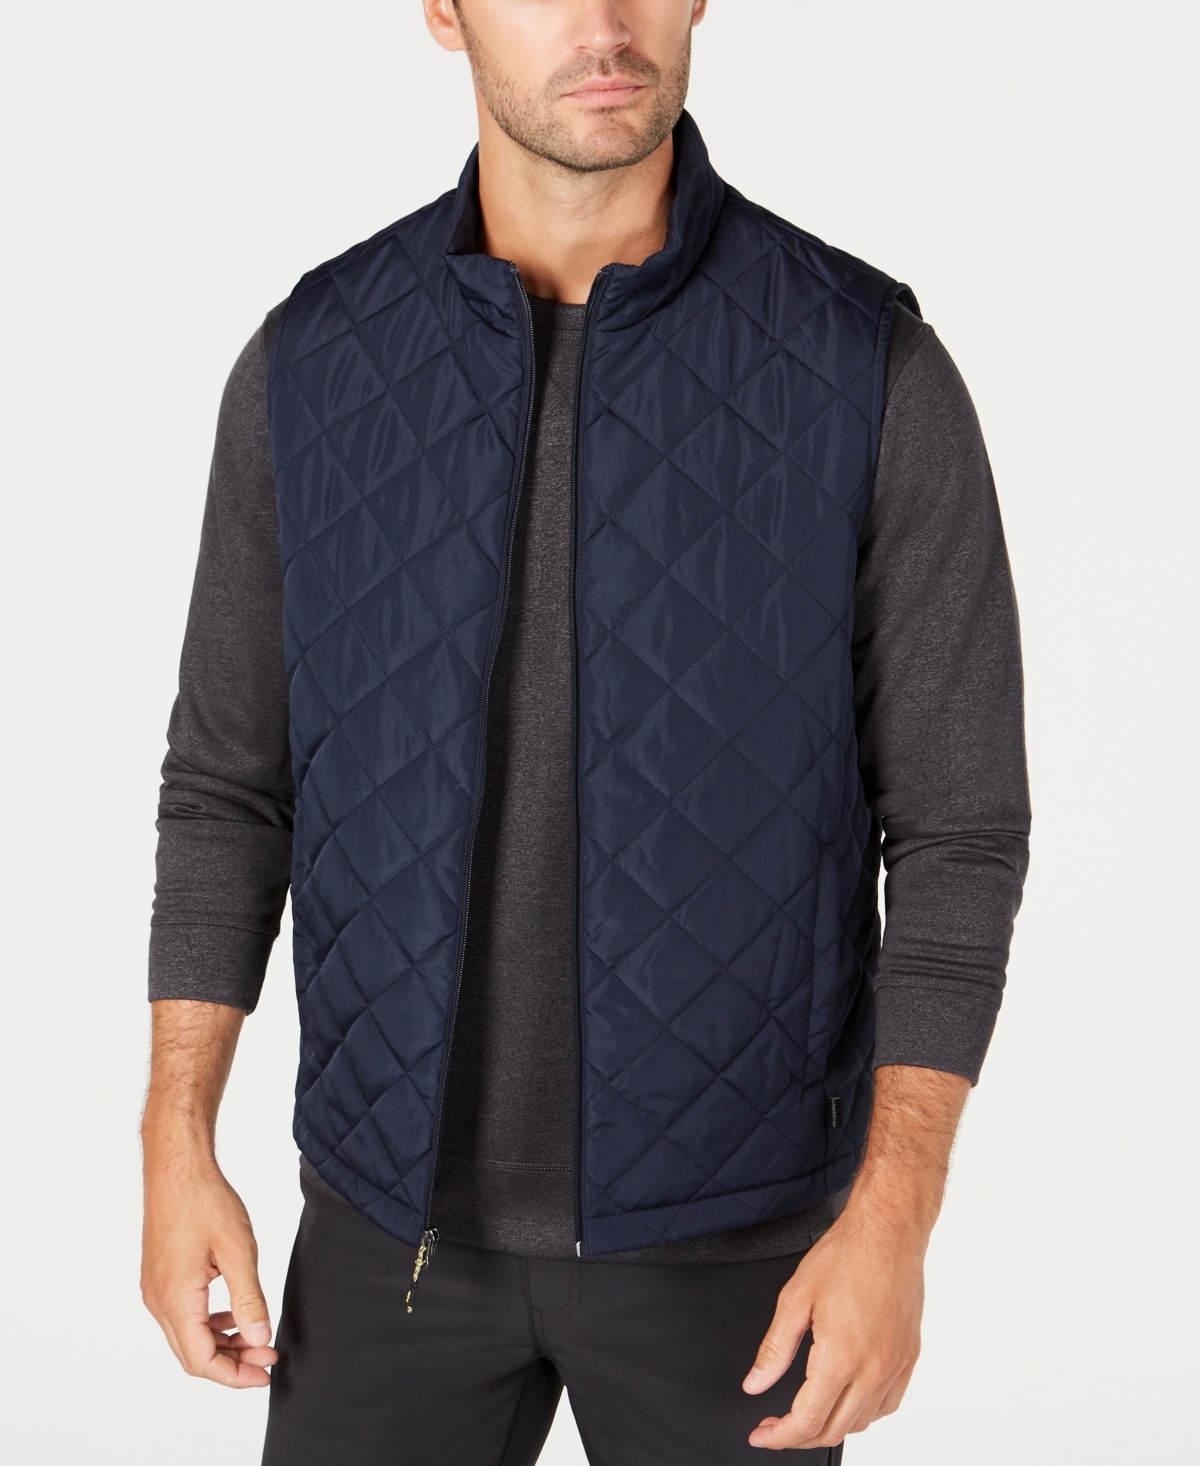 Men's Diamond Quilted Vest, Created for Macy's - Burgundy